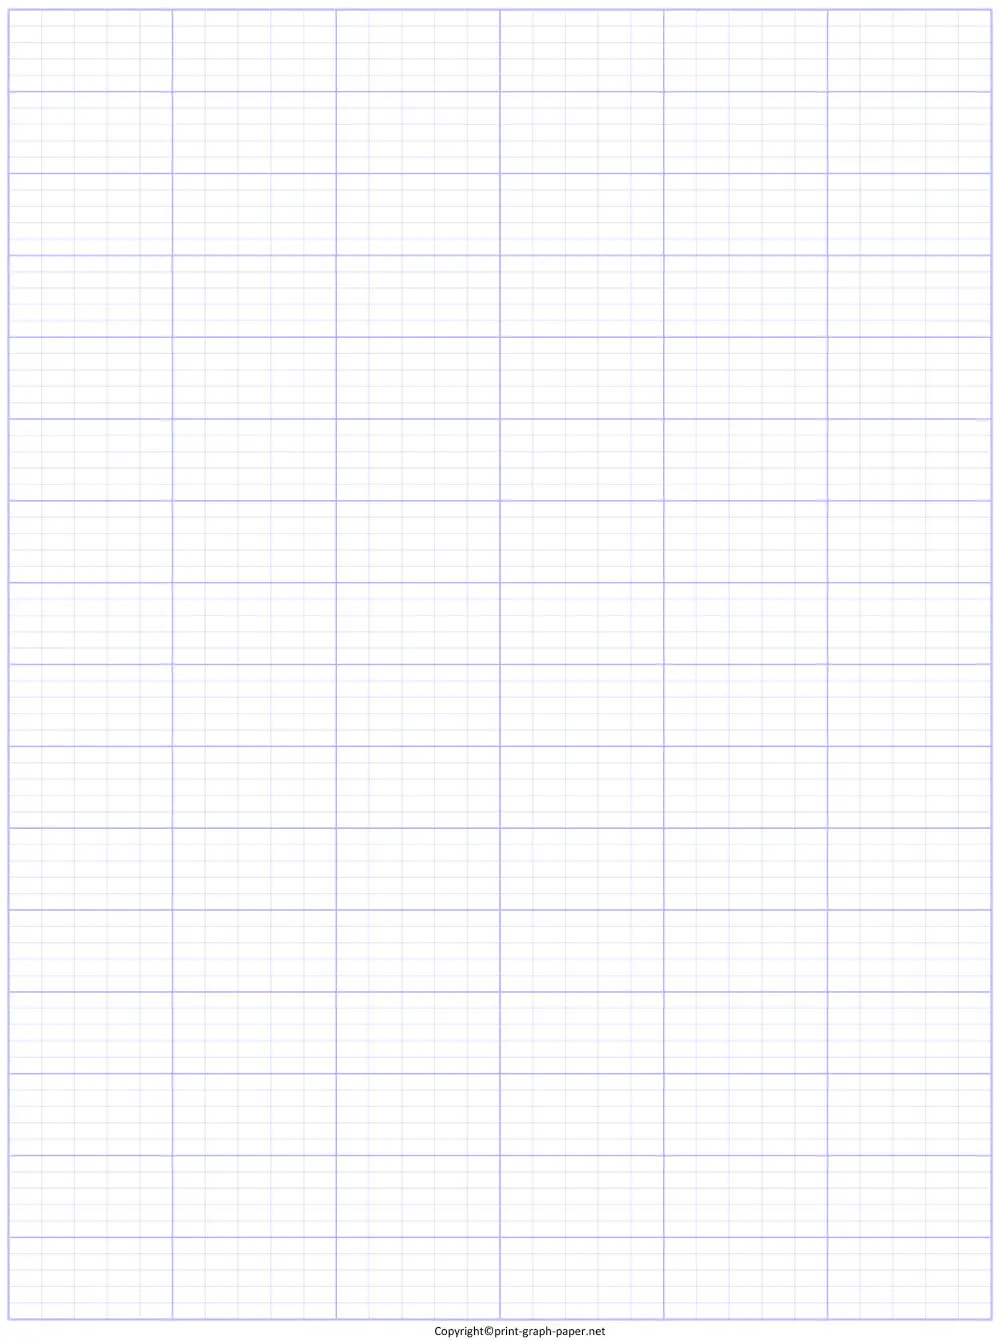 Graph Paper for Quilt Design and Patterns